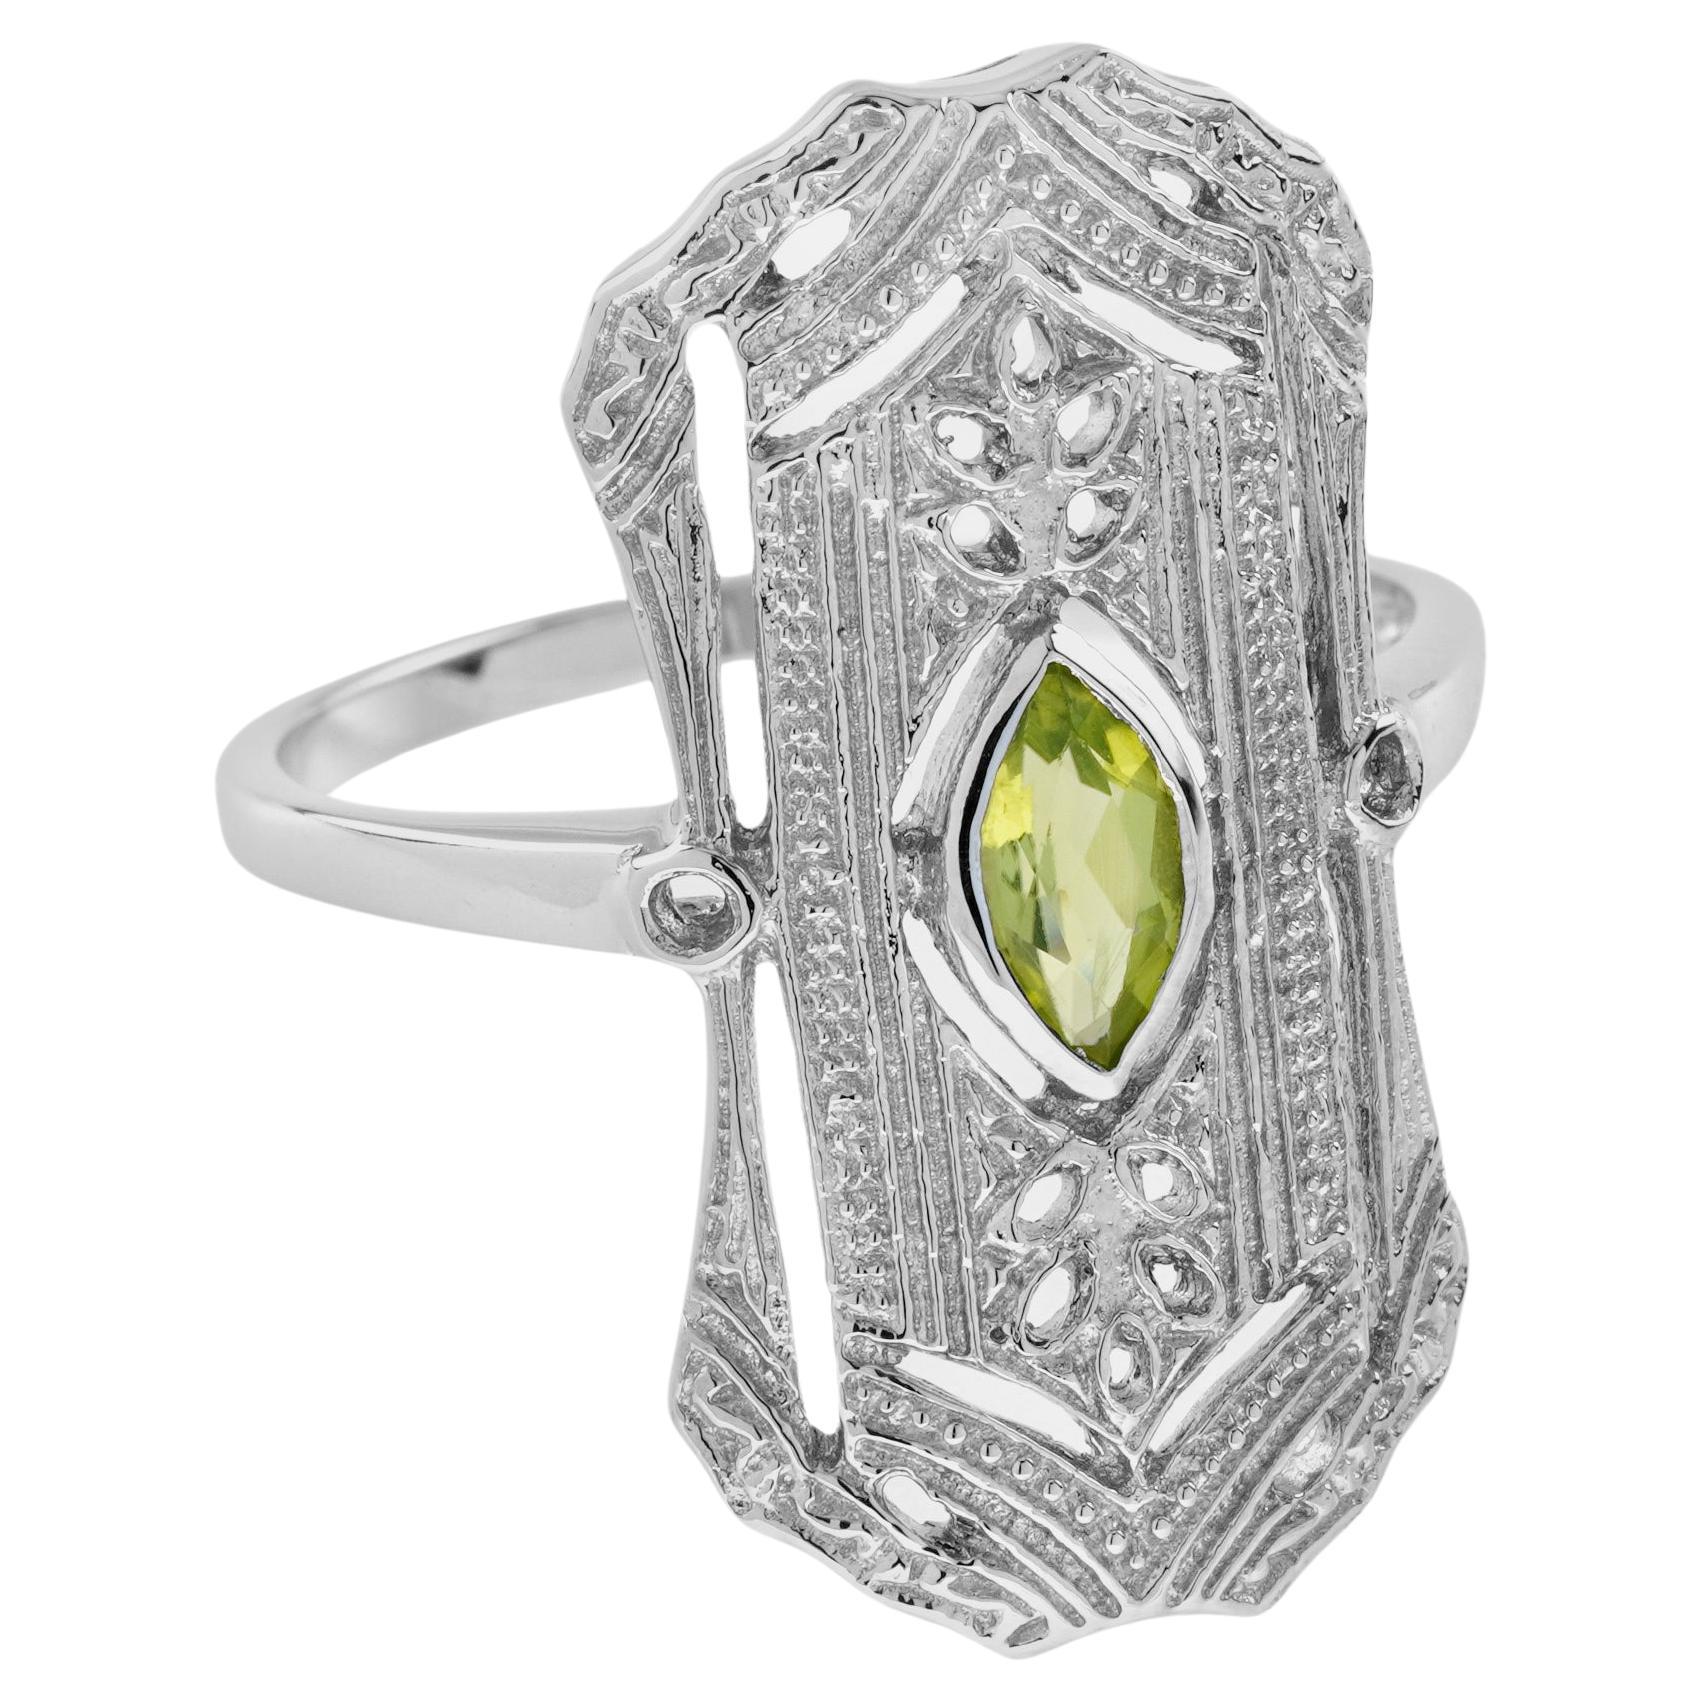 Natural Marquise Peridot Vintage Style Dinner Ring in Solid 9K White Gold